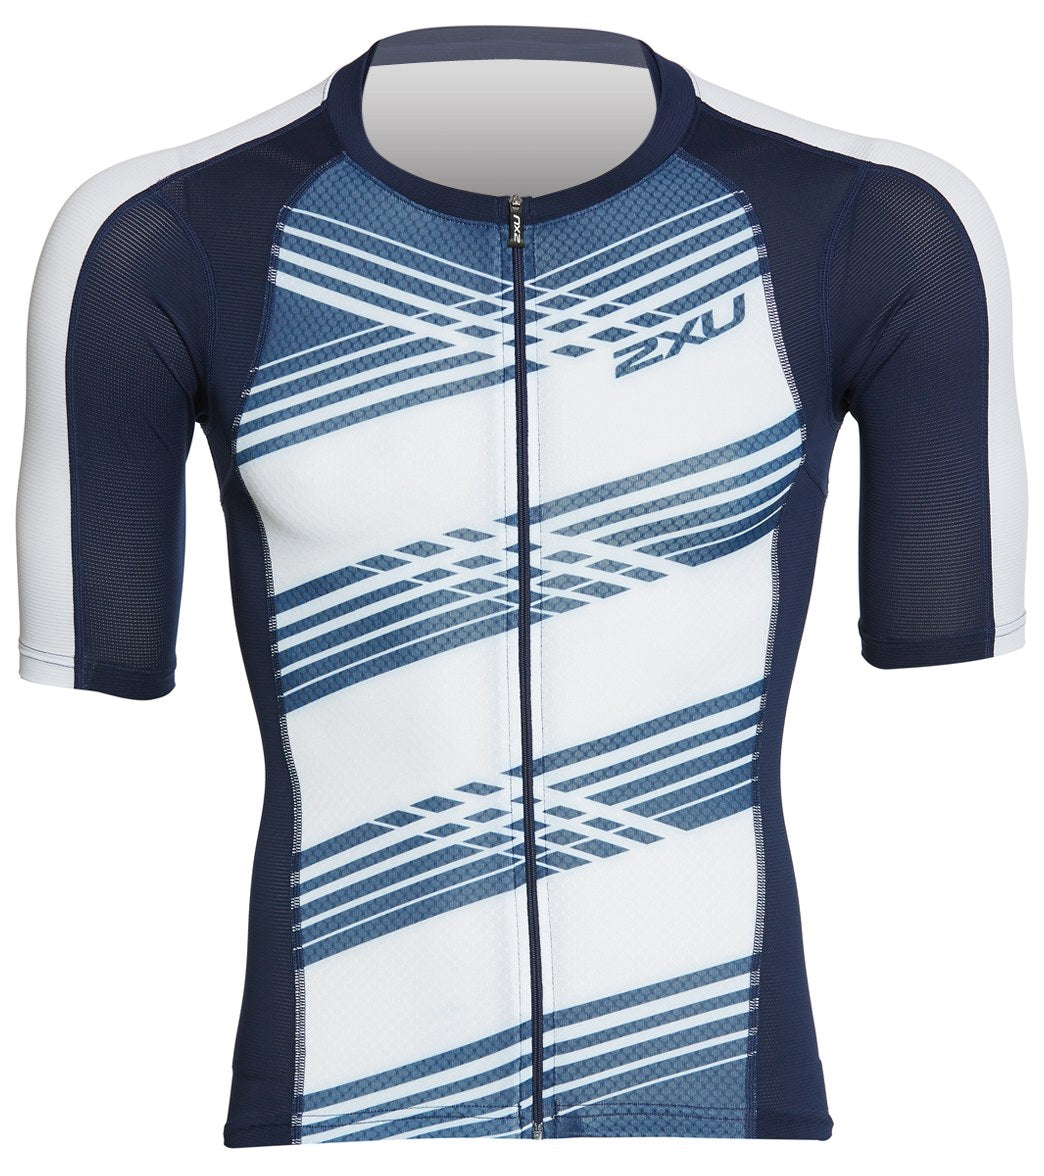 2Xu Men's Compression Sleeved Tri Top - Navy/Navy White Lines Large - Swimoutlet.com